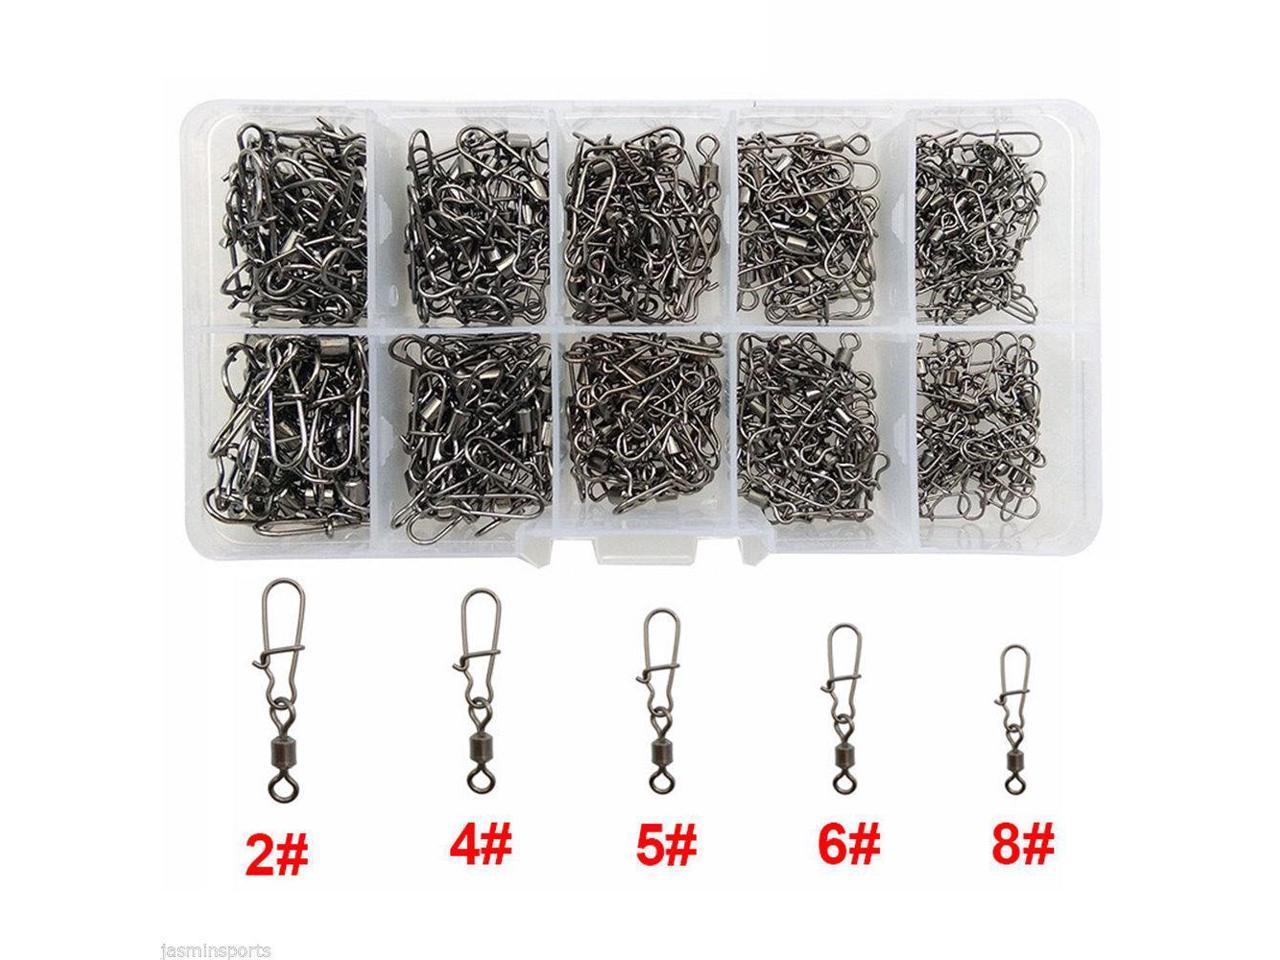 100 X Fishing Barrel Swivel&Safety Snap Accessories Tackle Connector Combo New 